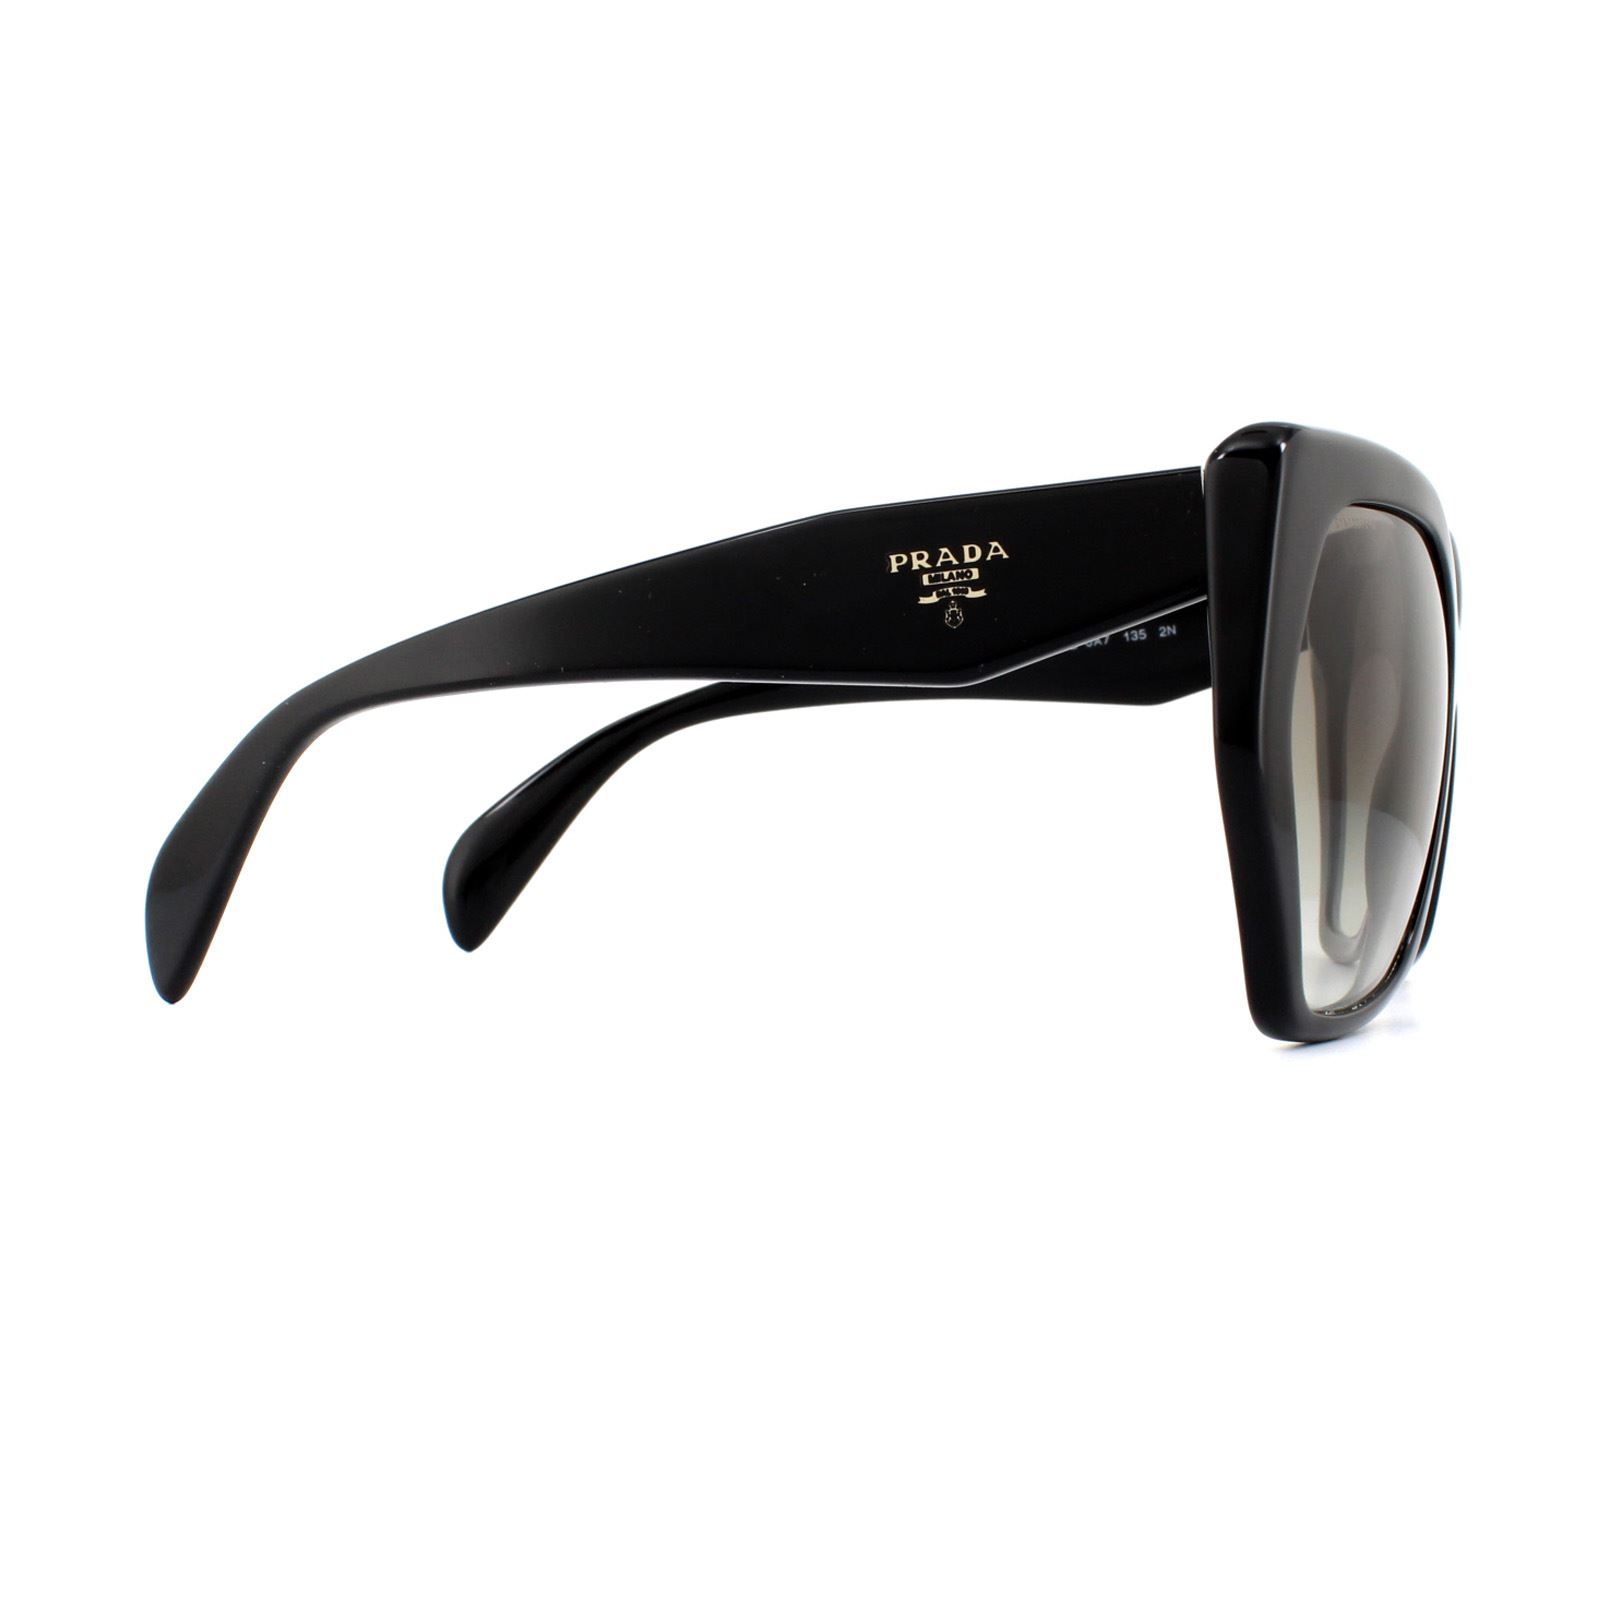 Prada Sunglasses PR 16RS 1AB0A7 Black Grey Gradient are from the Prada Triangle collection here updated with a larger oversized style frame with bold angles and that triangle shape on the temples emblazoned with the Prada Milano logo.